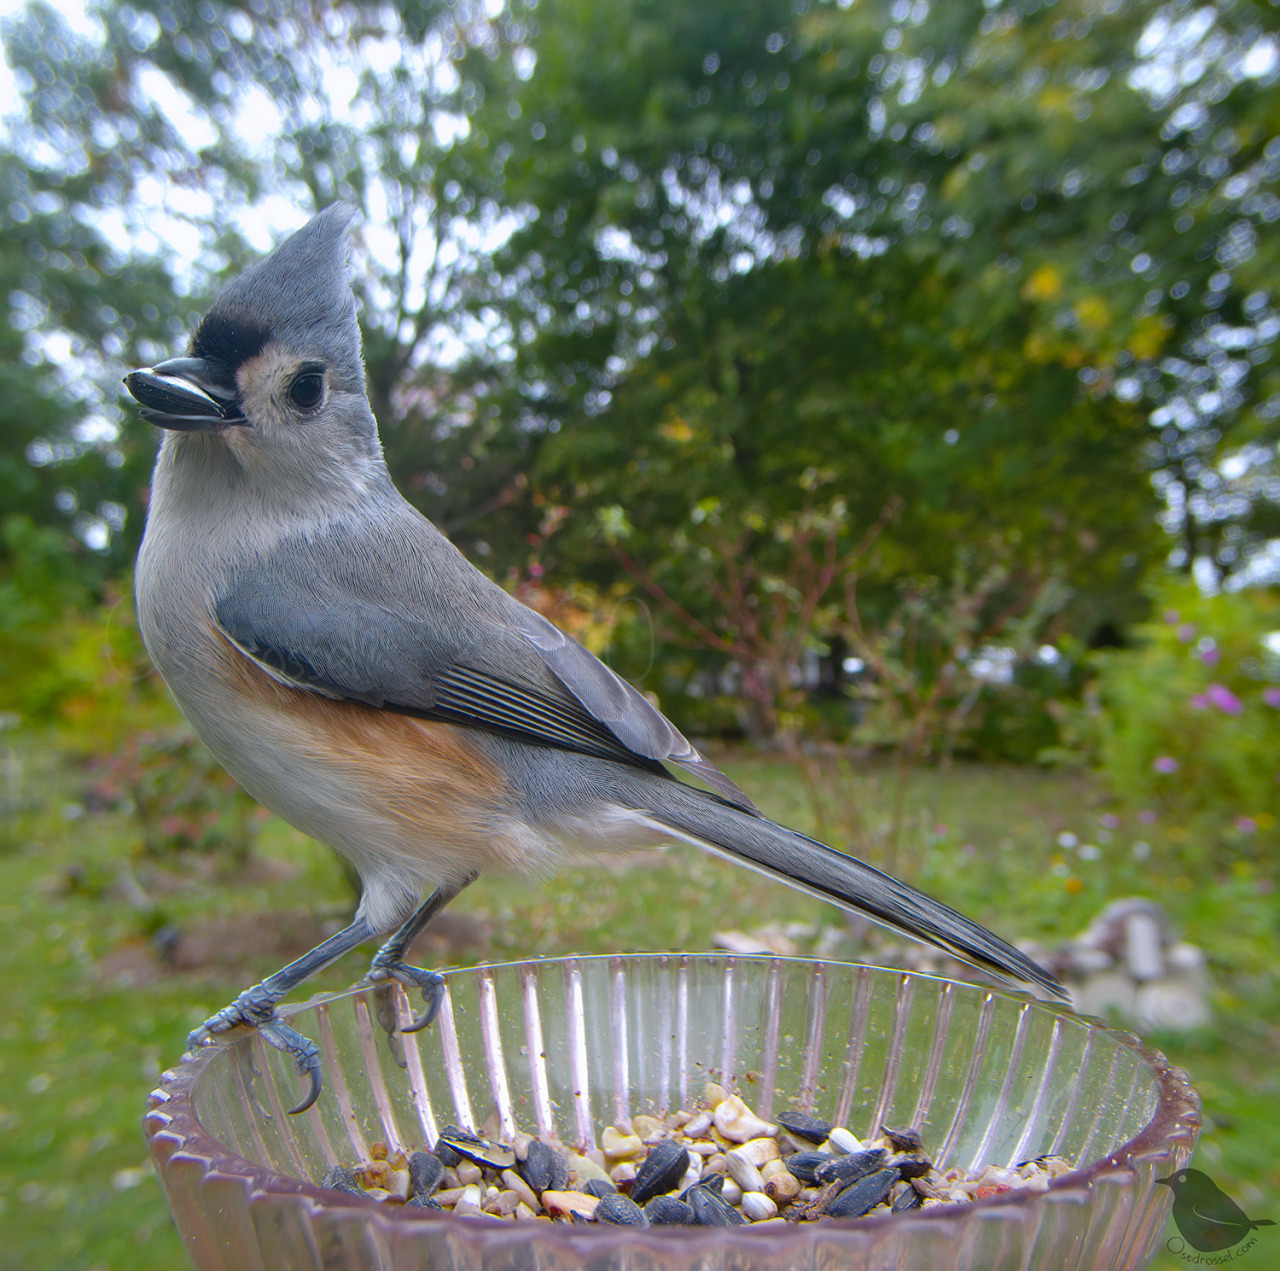 Ostdrossel™ — Titmouse, Blue Jay and female Cardi were on high